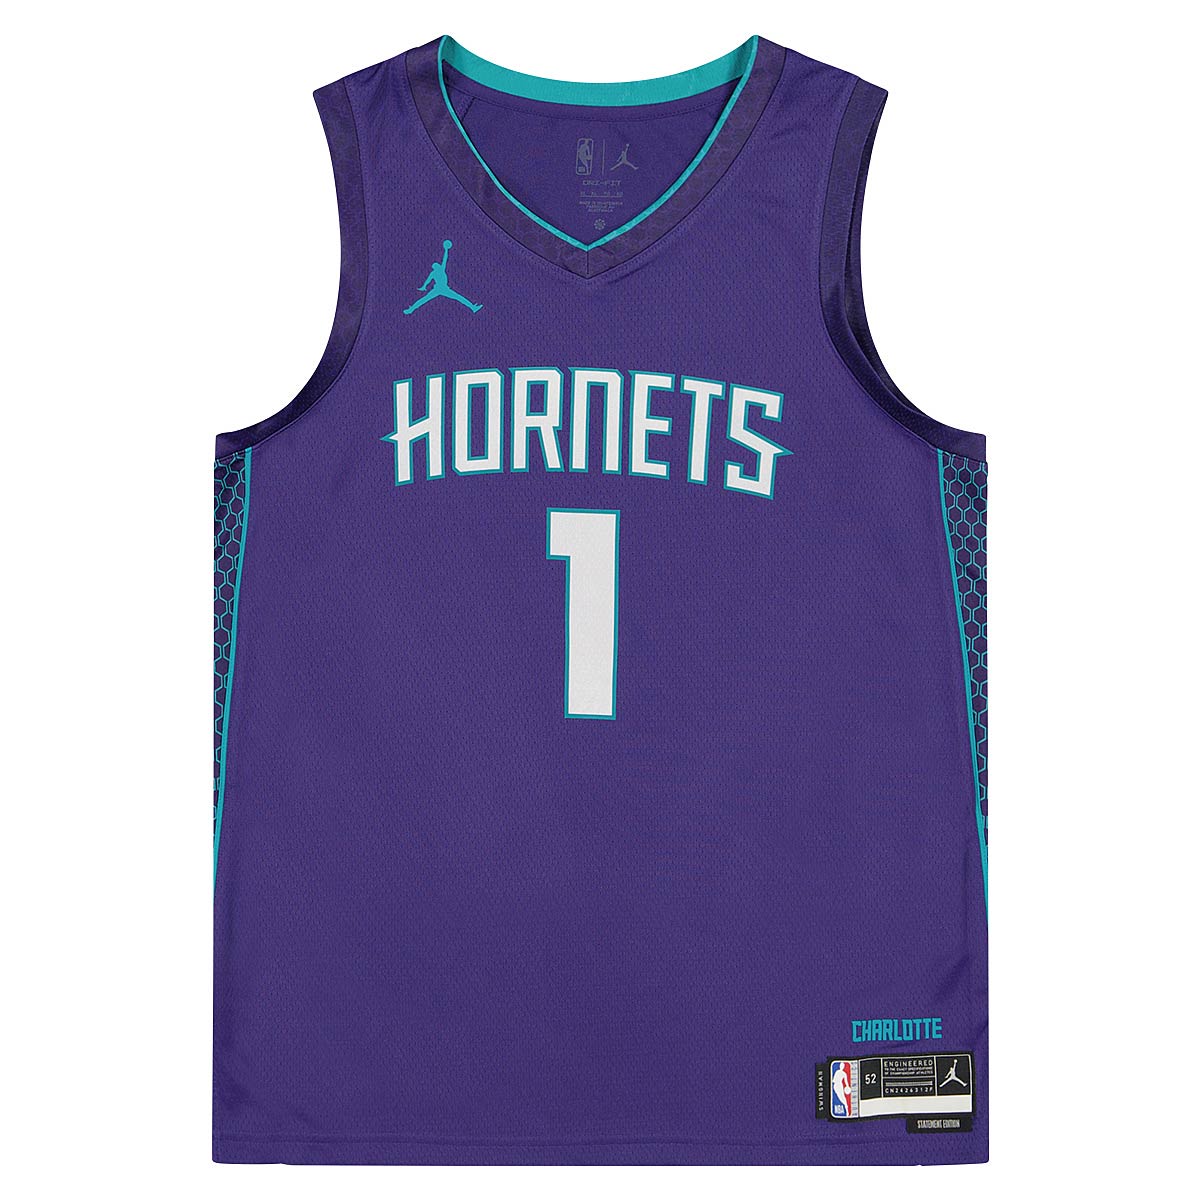 LaMelo Ball - Charlotte Hornets - Kia NBA Tip-Off 2020 - Game-Worn  Association Edition Jersey - NBA Debut (3rd Overall Draft Pick)